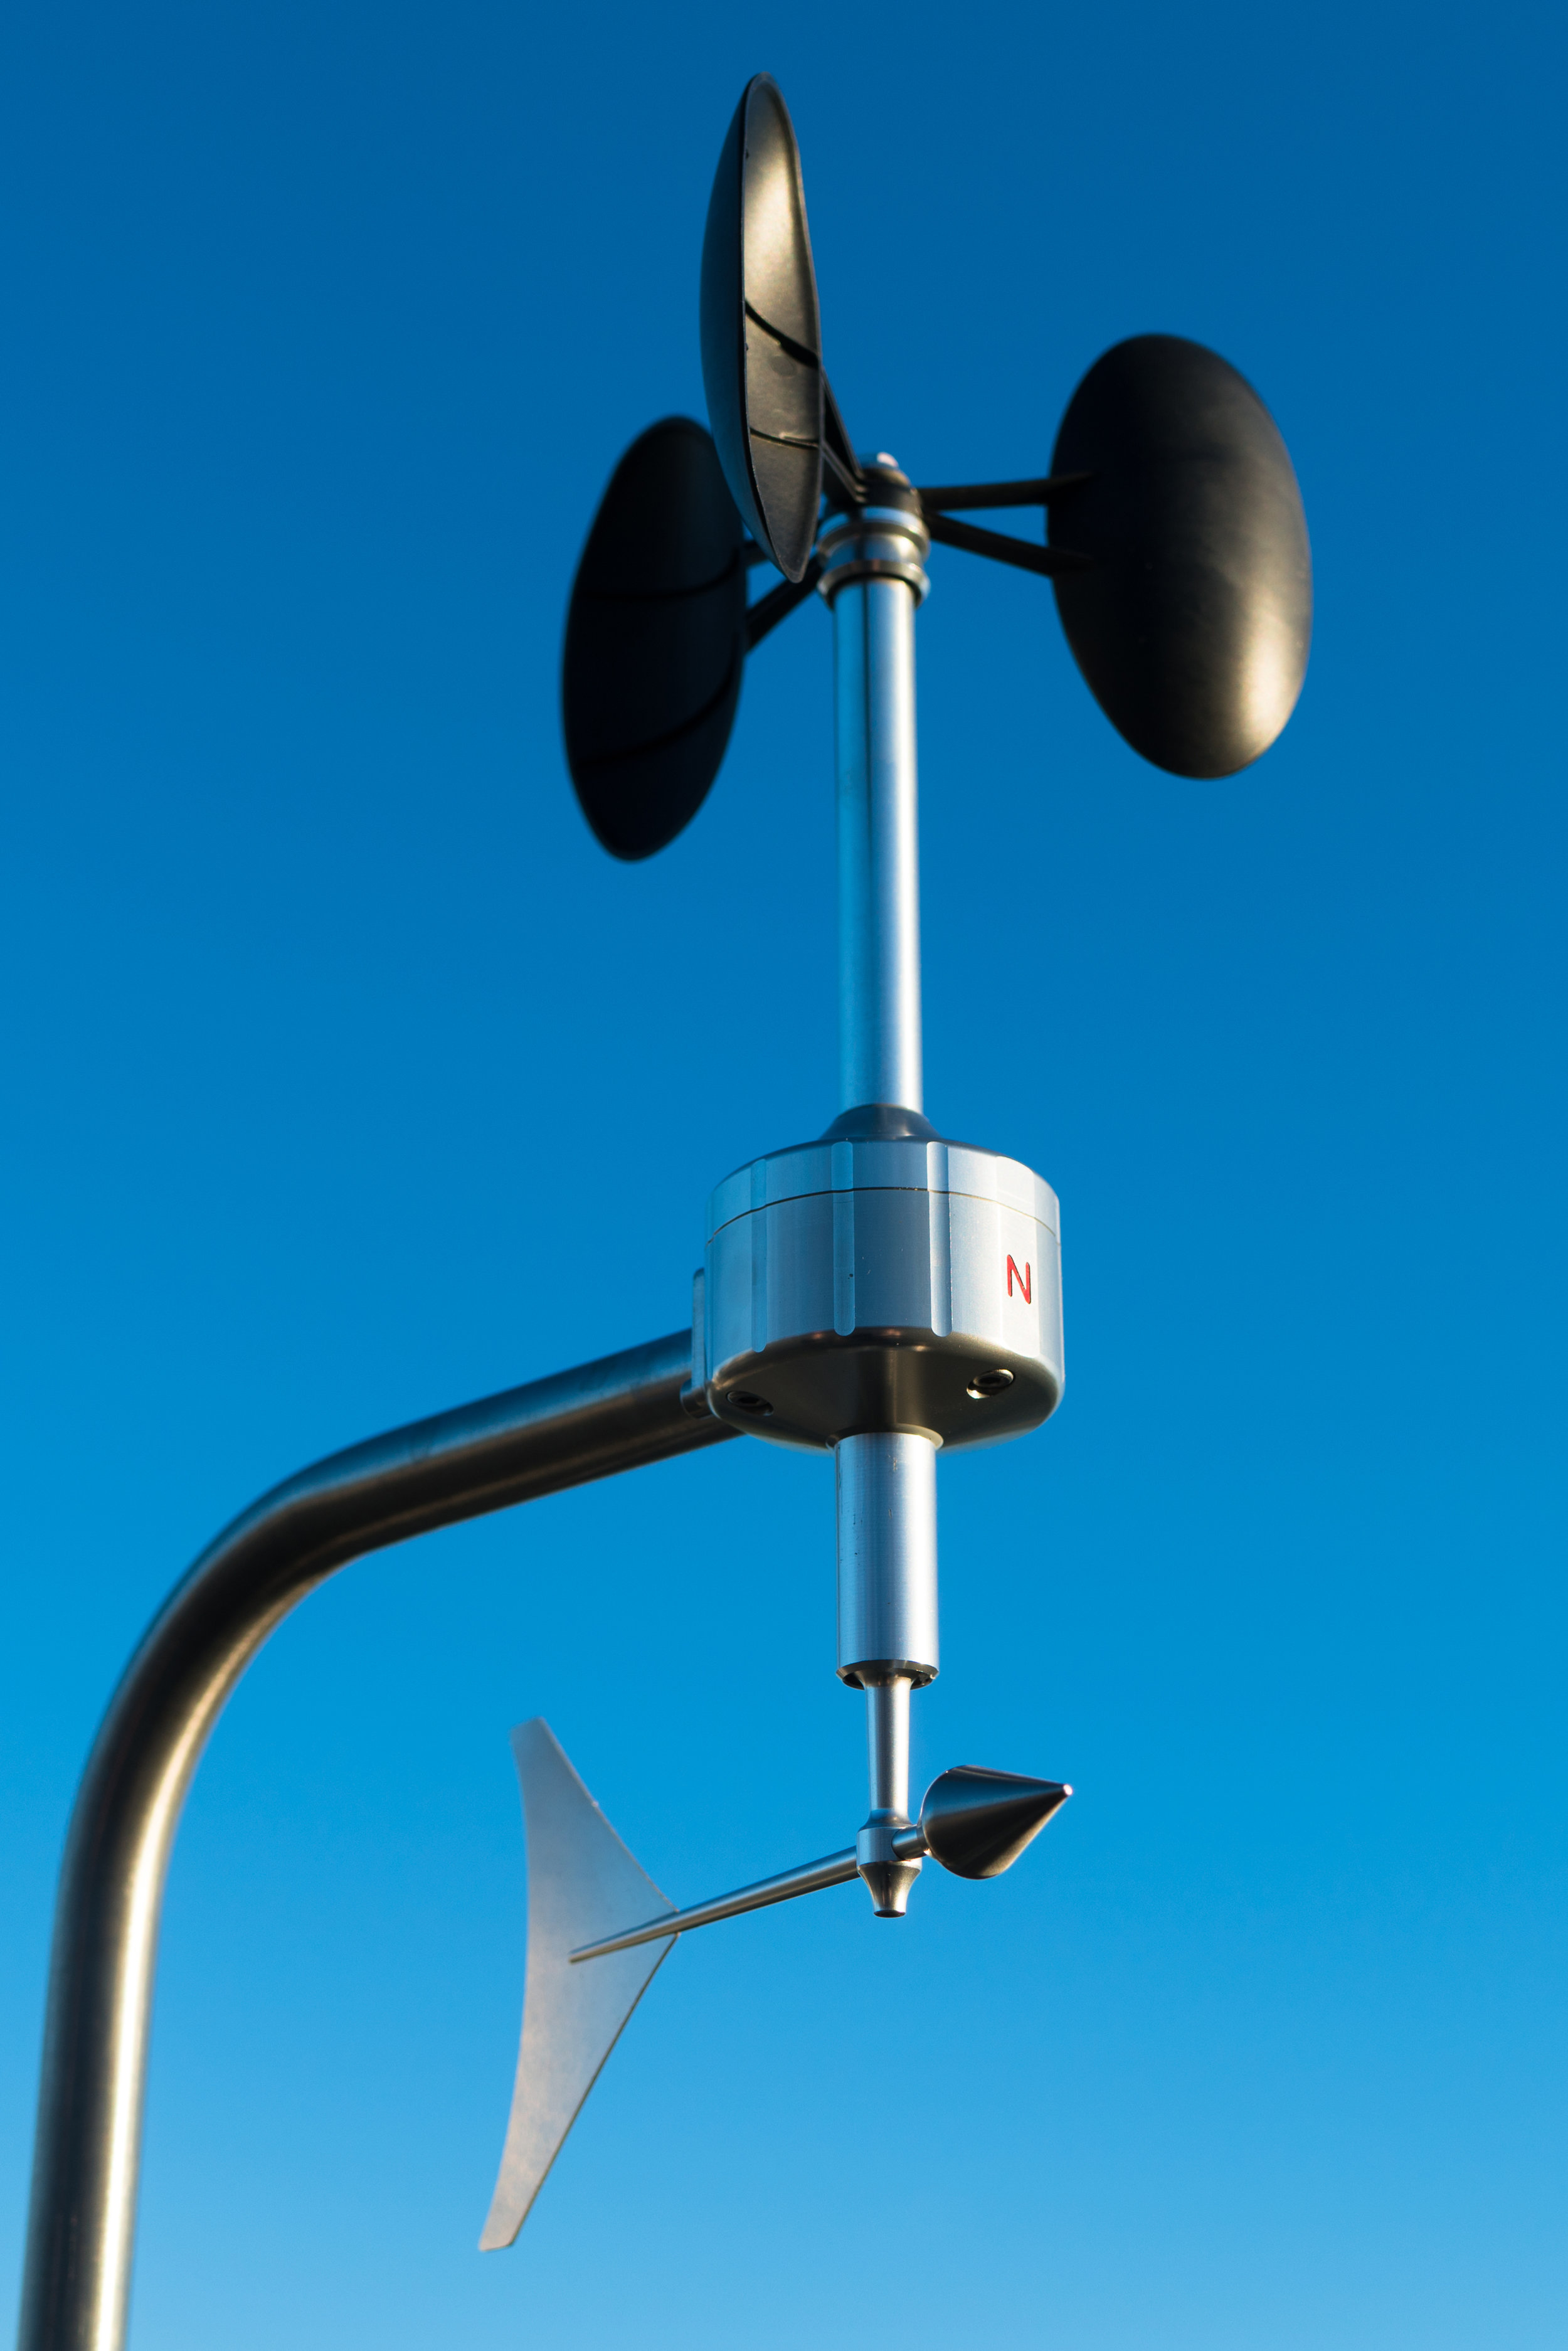 Anemometer detail in clear blue sky